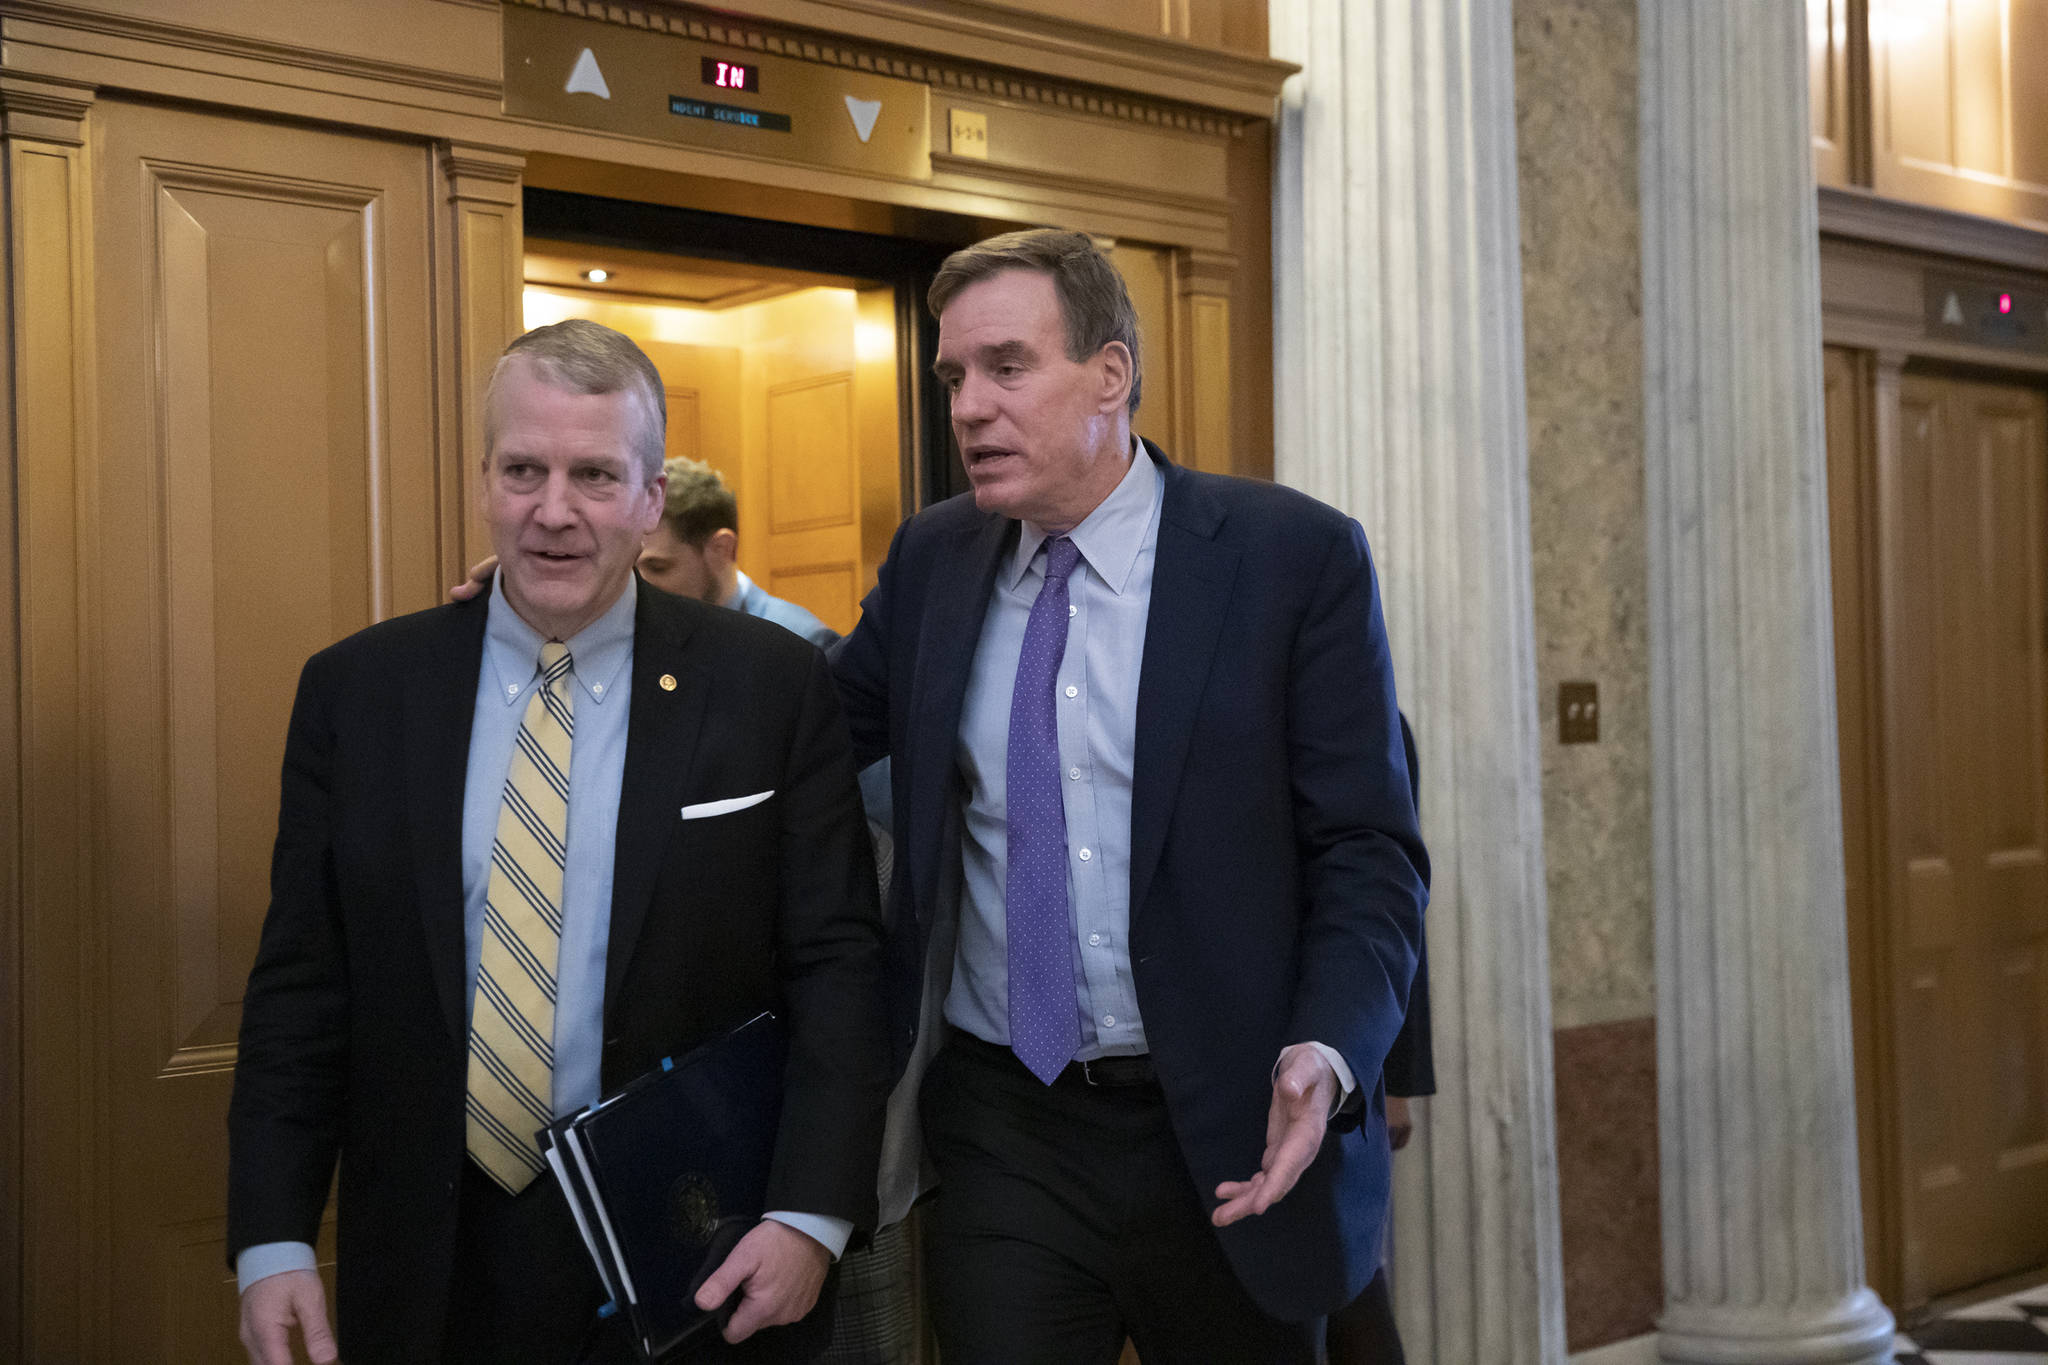 Sen. Dan Sullivan, R-Alaska, left, and Sen. Mark Warner, D-Virginia, the vice-chair of the Senate Intelligence Committee, arrive at the Senate prior to a vote on ending the partial government shutdown, at the Capitol in Washington on Thursday, Jan. 24, 2019. (J. Scott Applewhite | Associated Press)